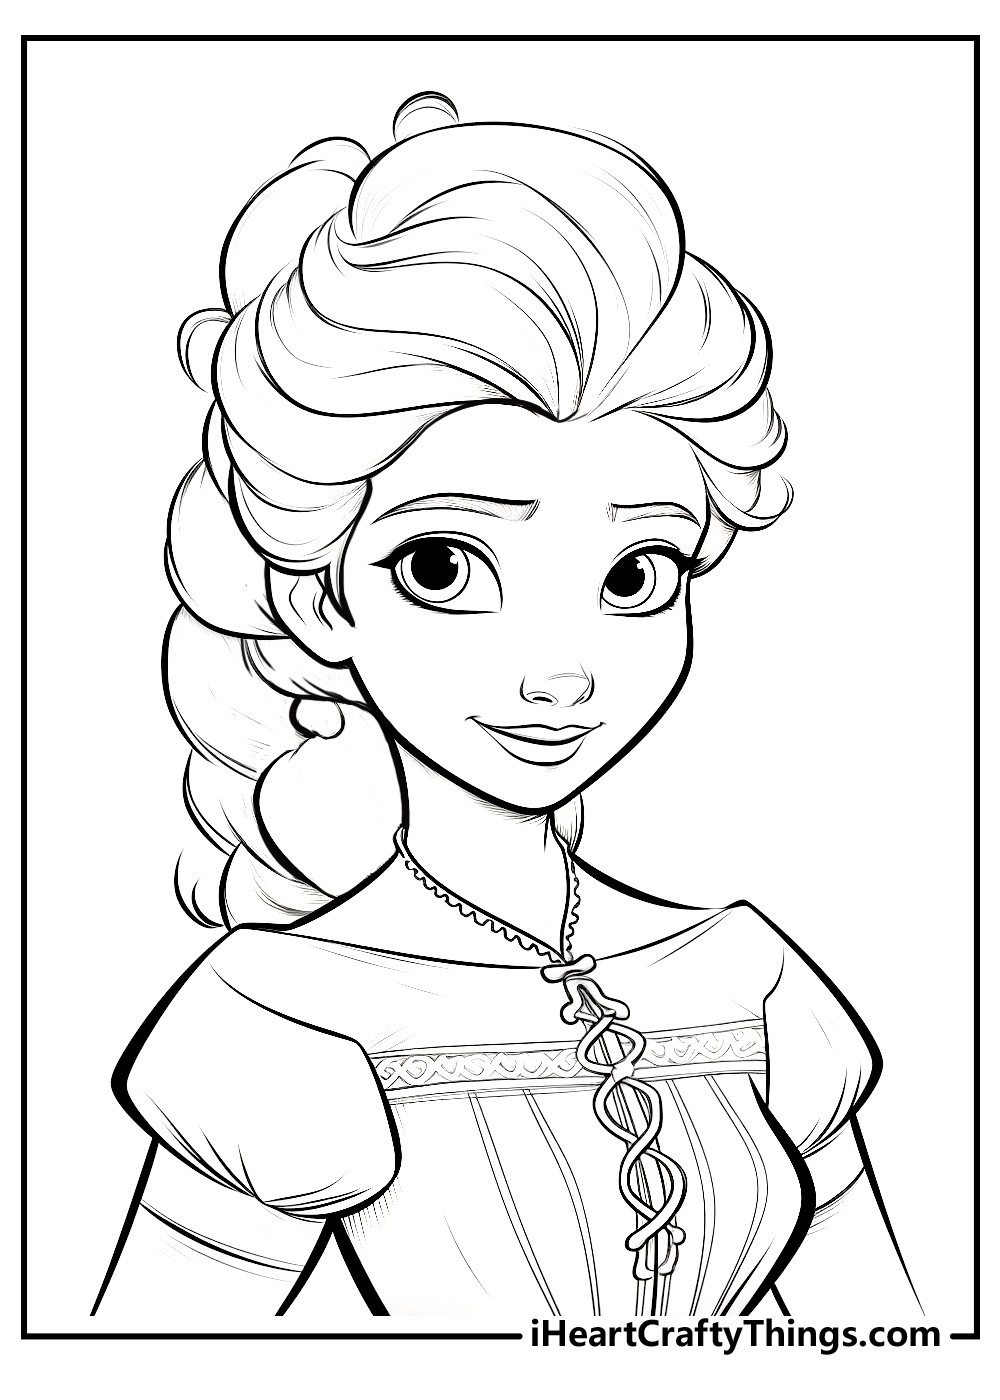 Elsa coloring pages free printables